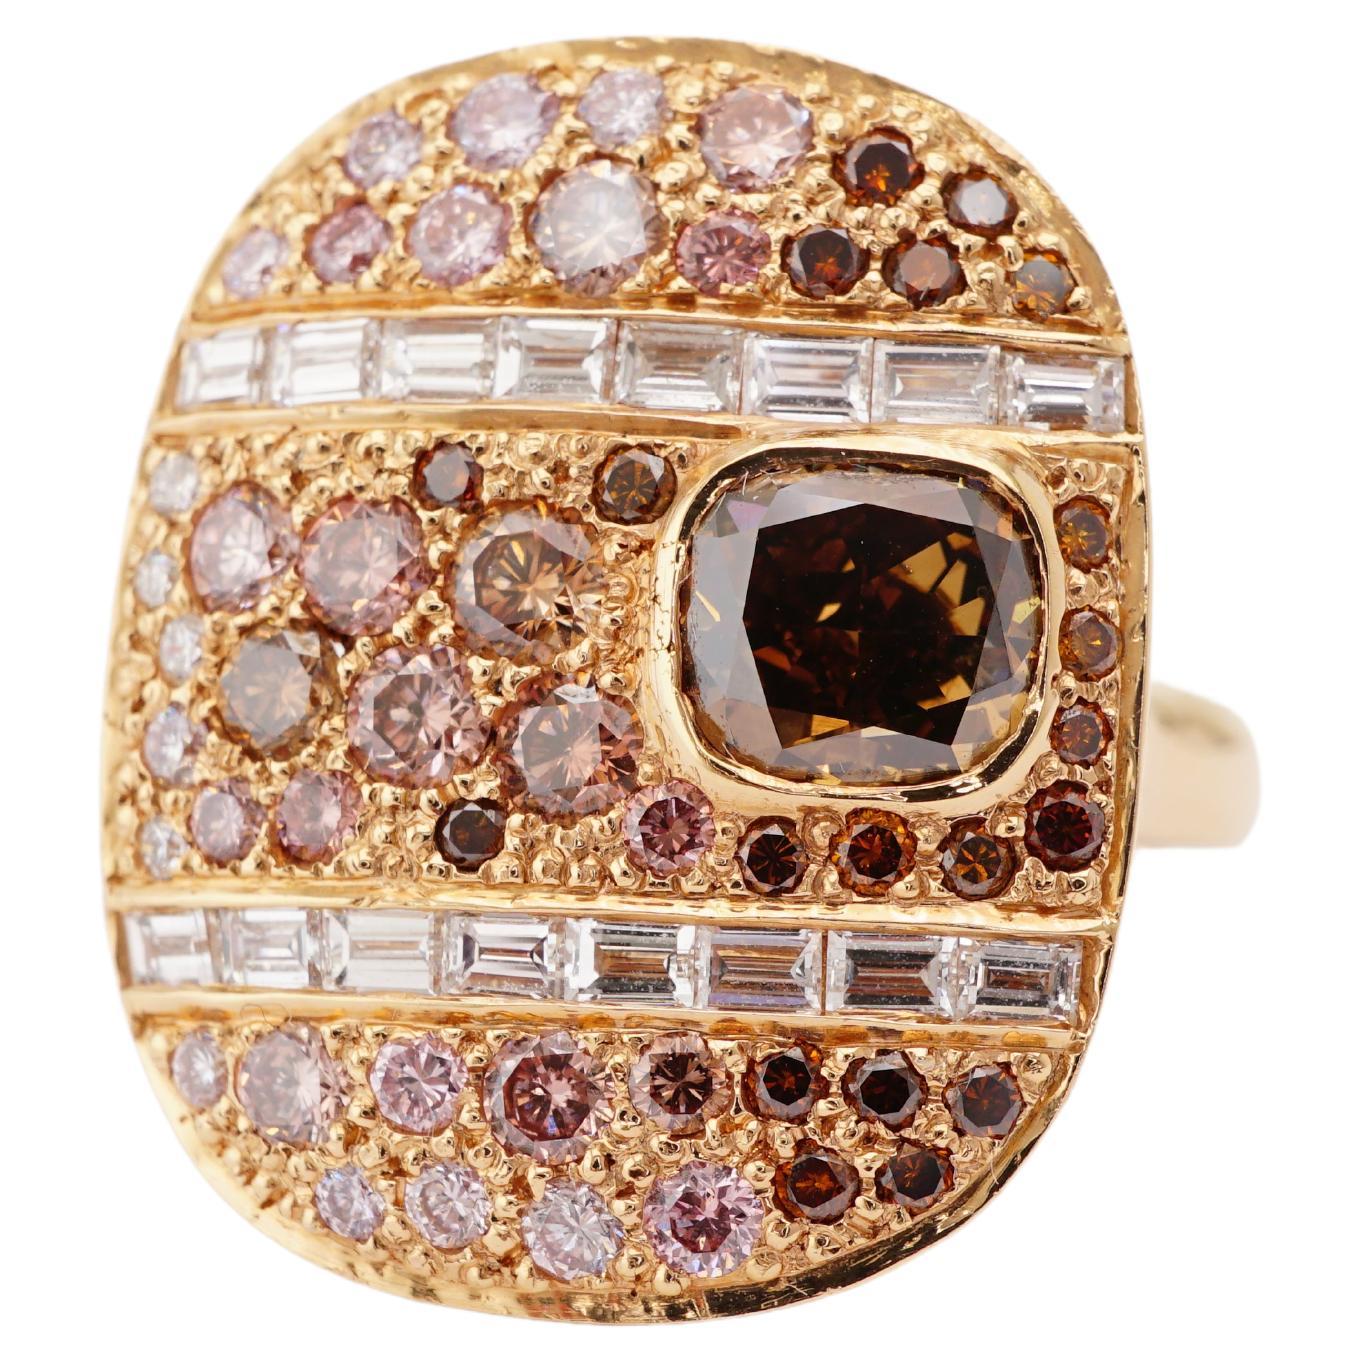 "Wagner Cove" Fancy Colored Diamonds Simon Ardem New York Fall Collection Ring